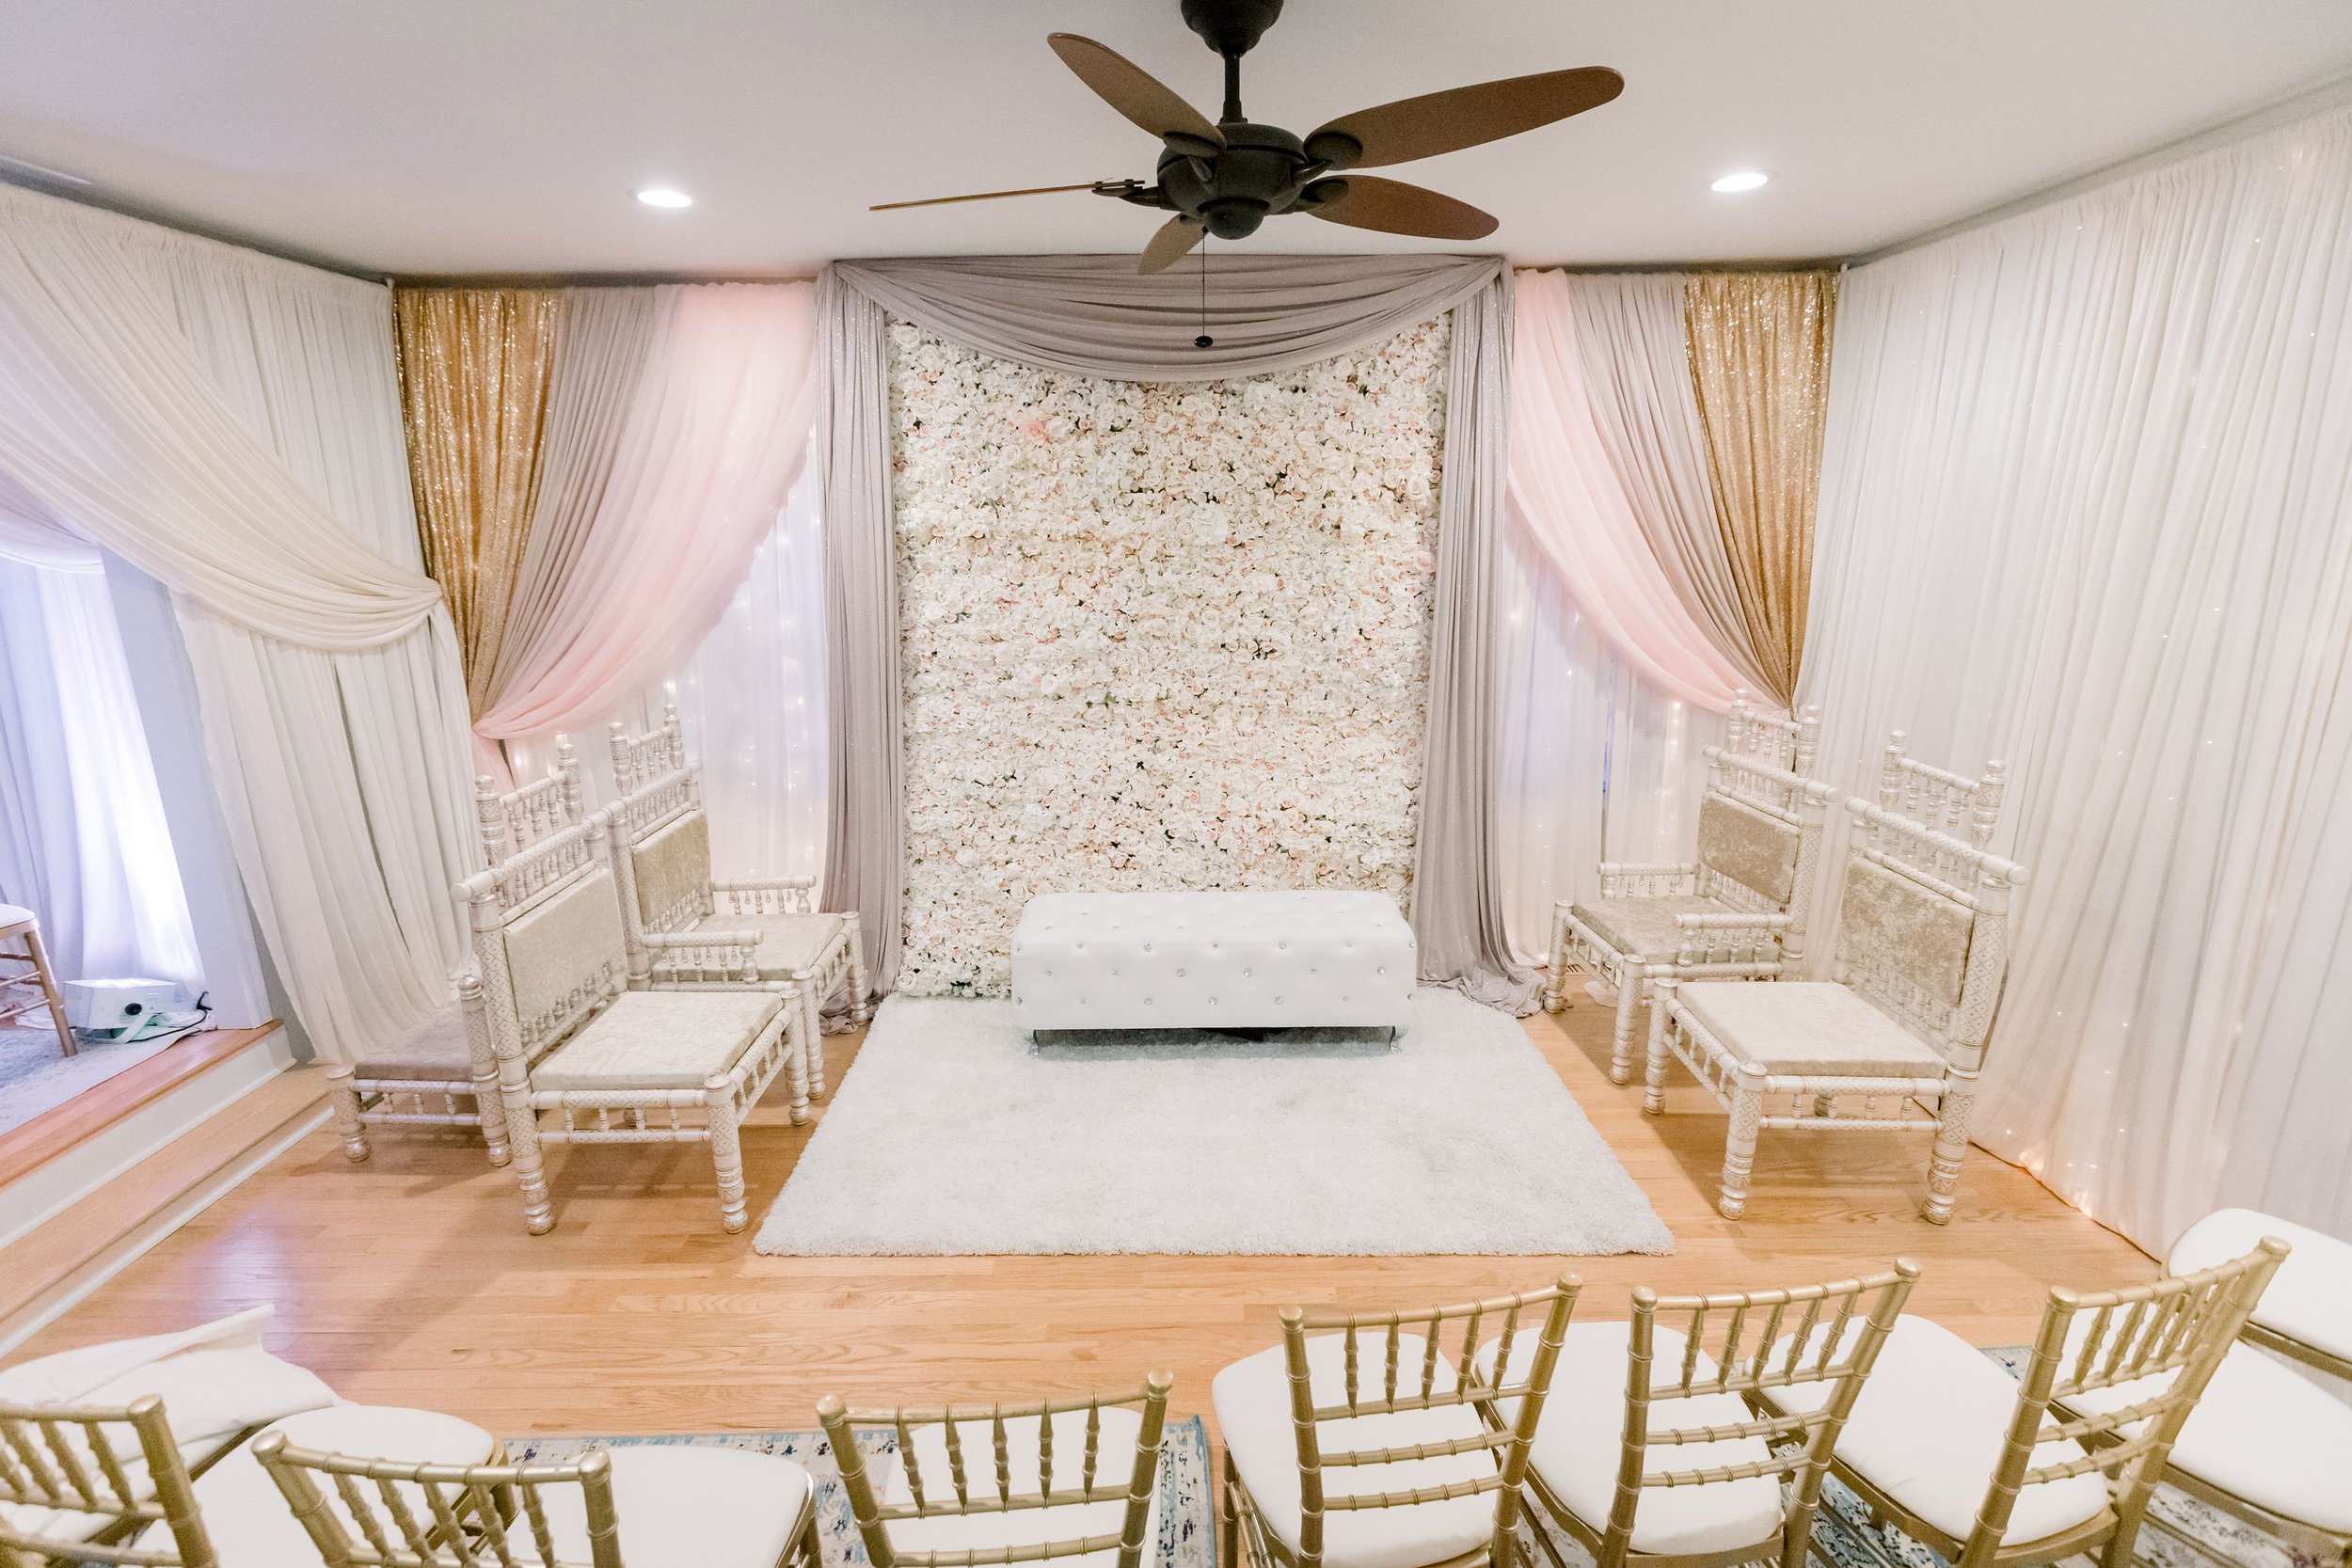 Basement wall draping wedding in the living room garage wall draping intimate wedding at home micro wedding event in chicago chiavari chairs table ren (5).jpg